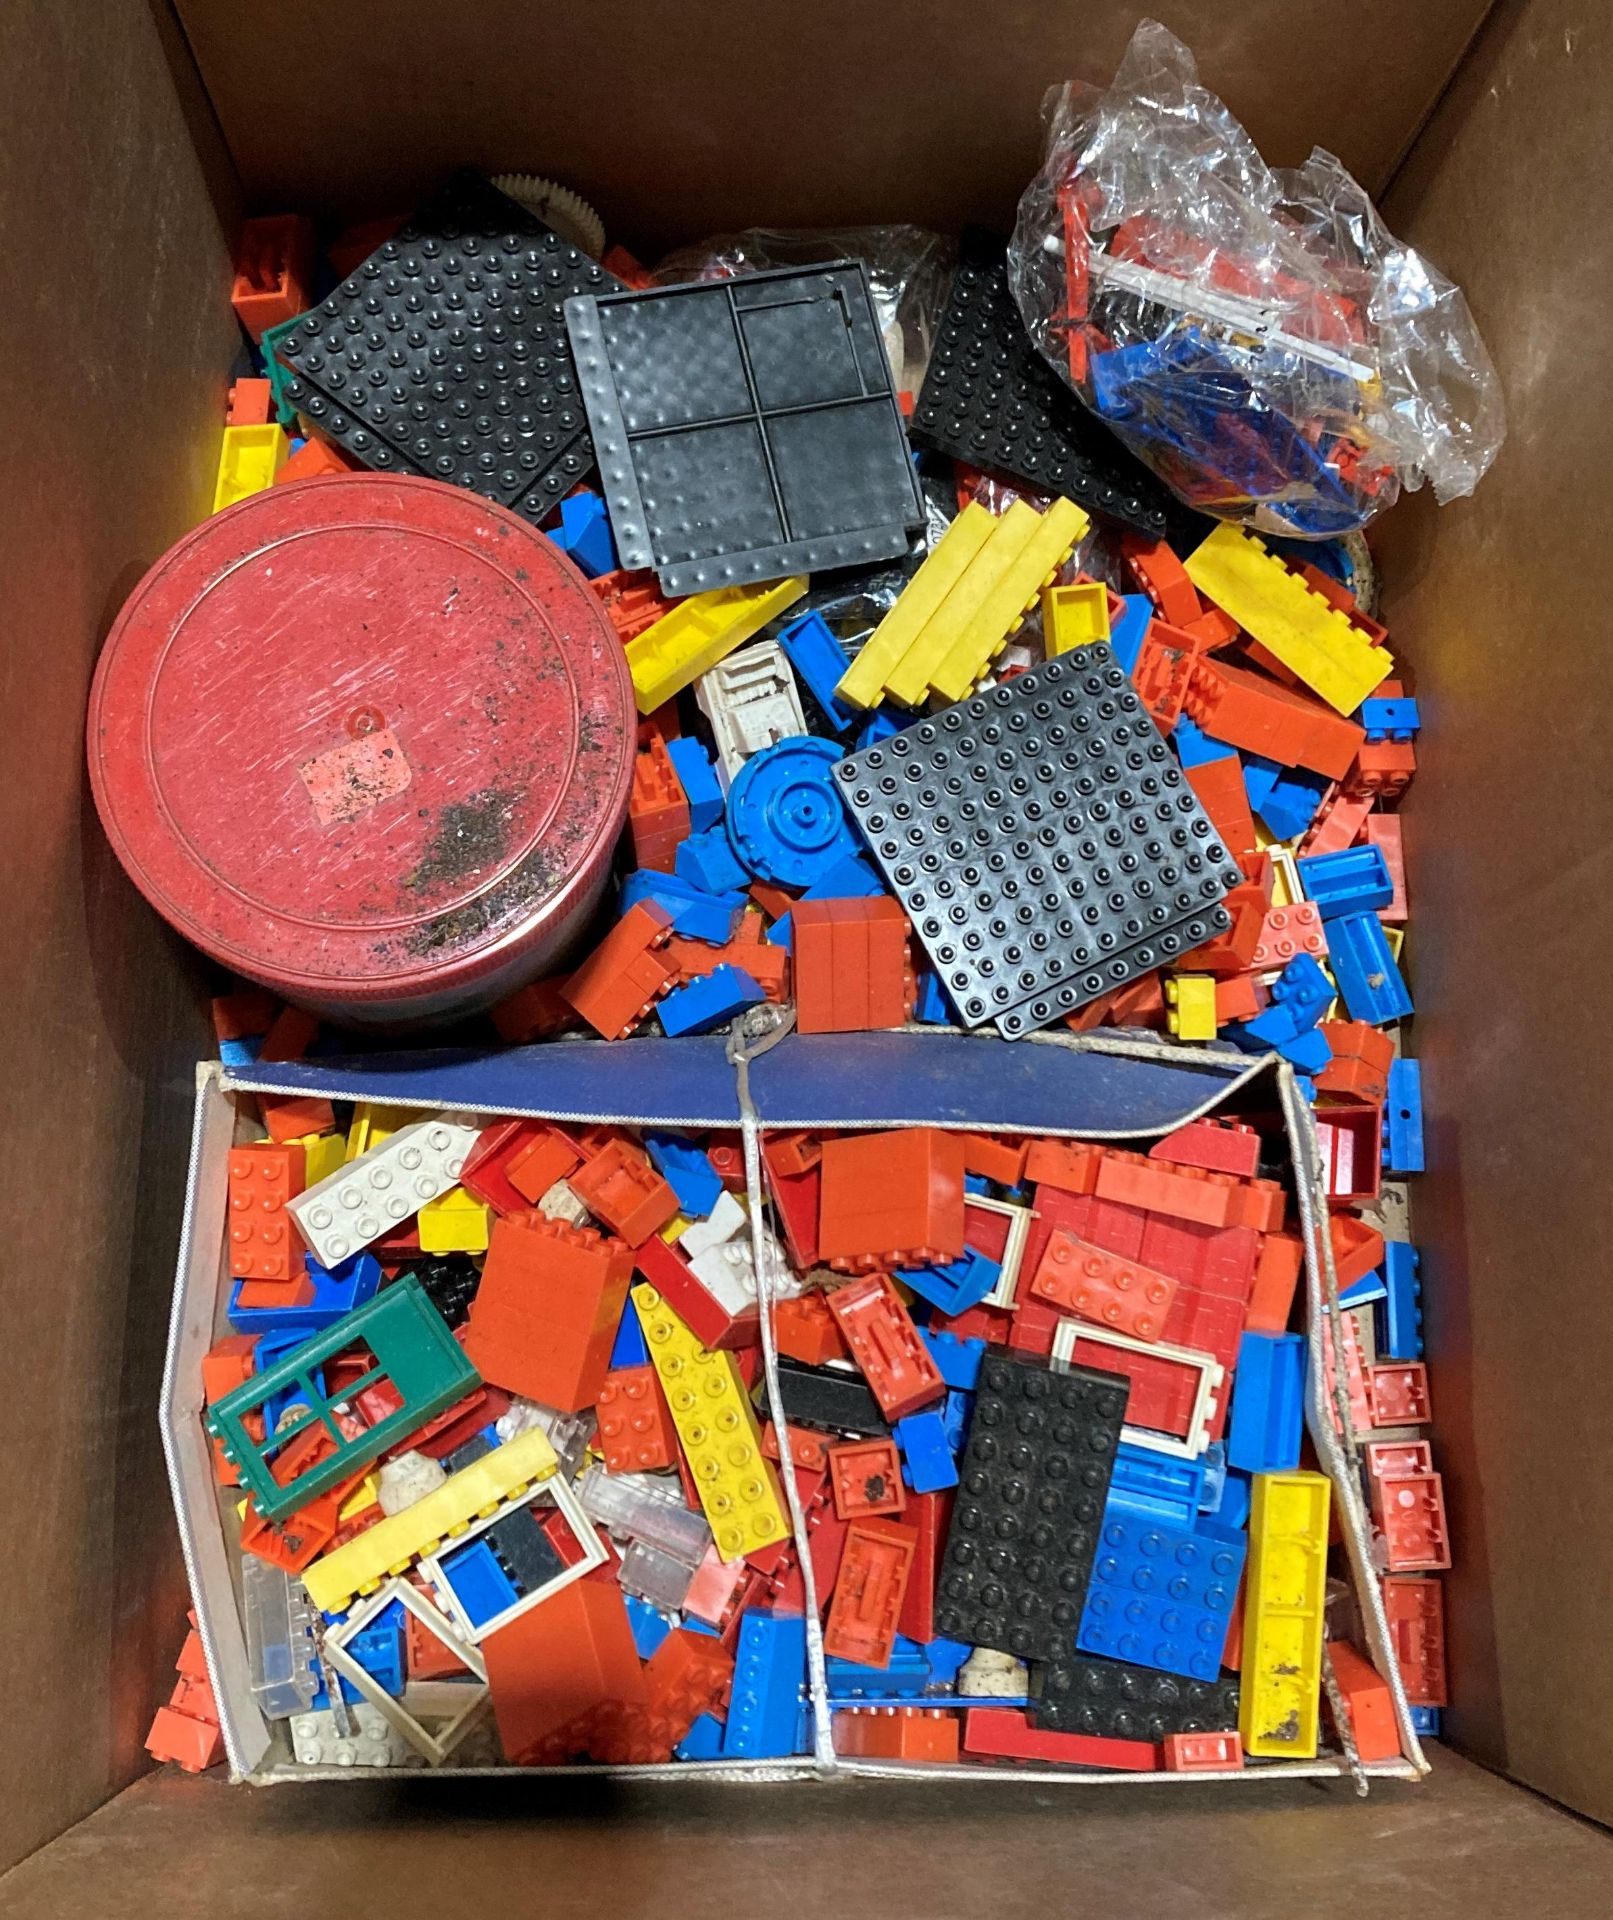 Contents to box - assorted Lego and other building blocks, etc.